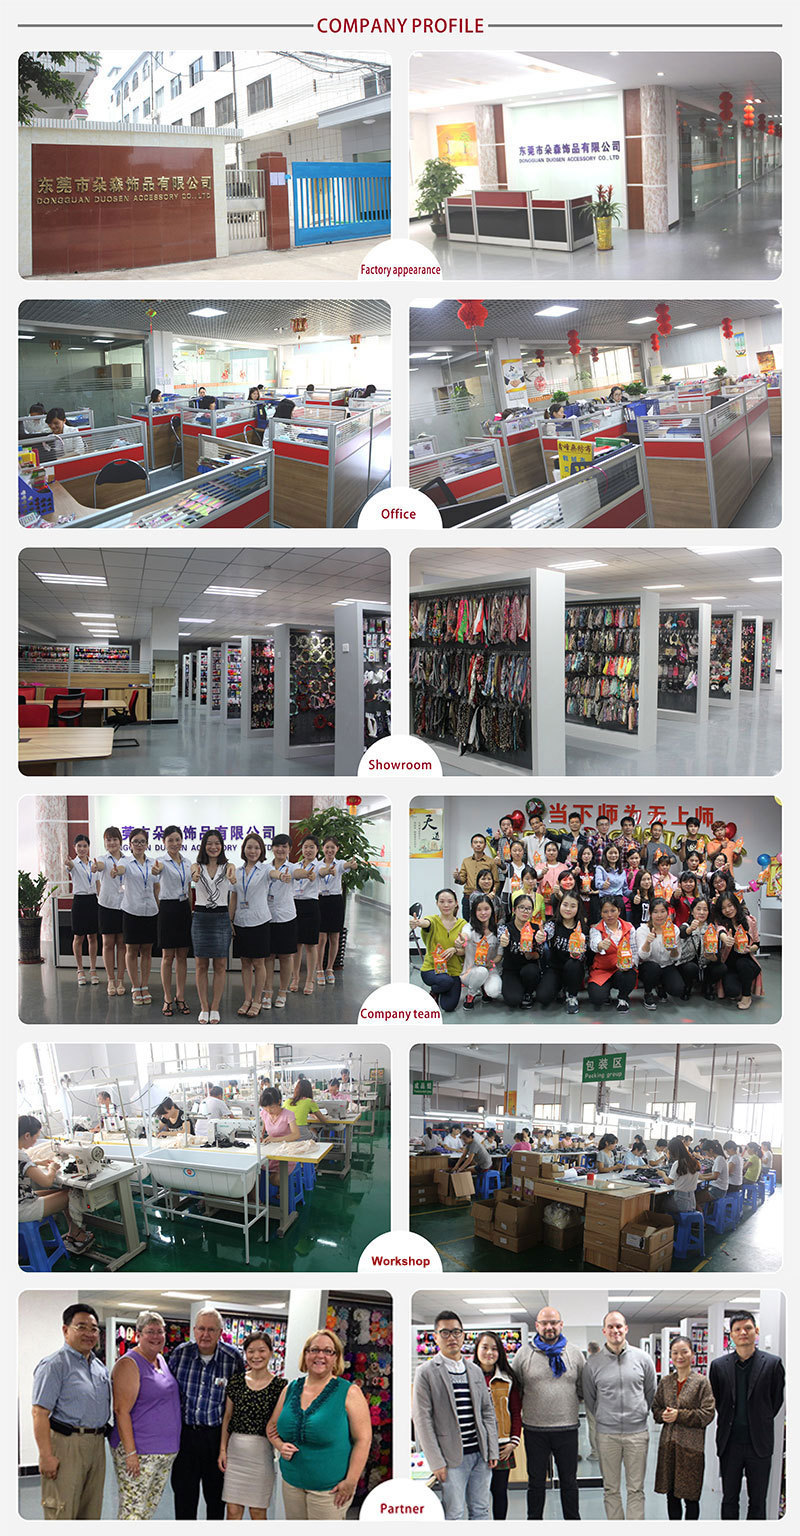 duosen hair accessory company is a manufacturer that has own factory with profetional R&D and work team,attracted numerous of customers to visit our large sample showroom